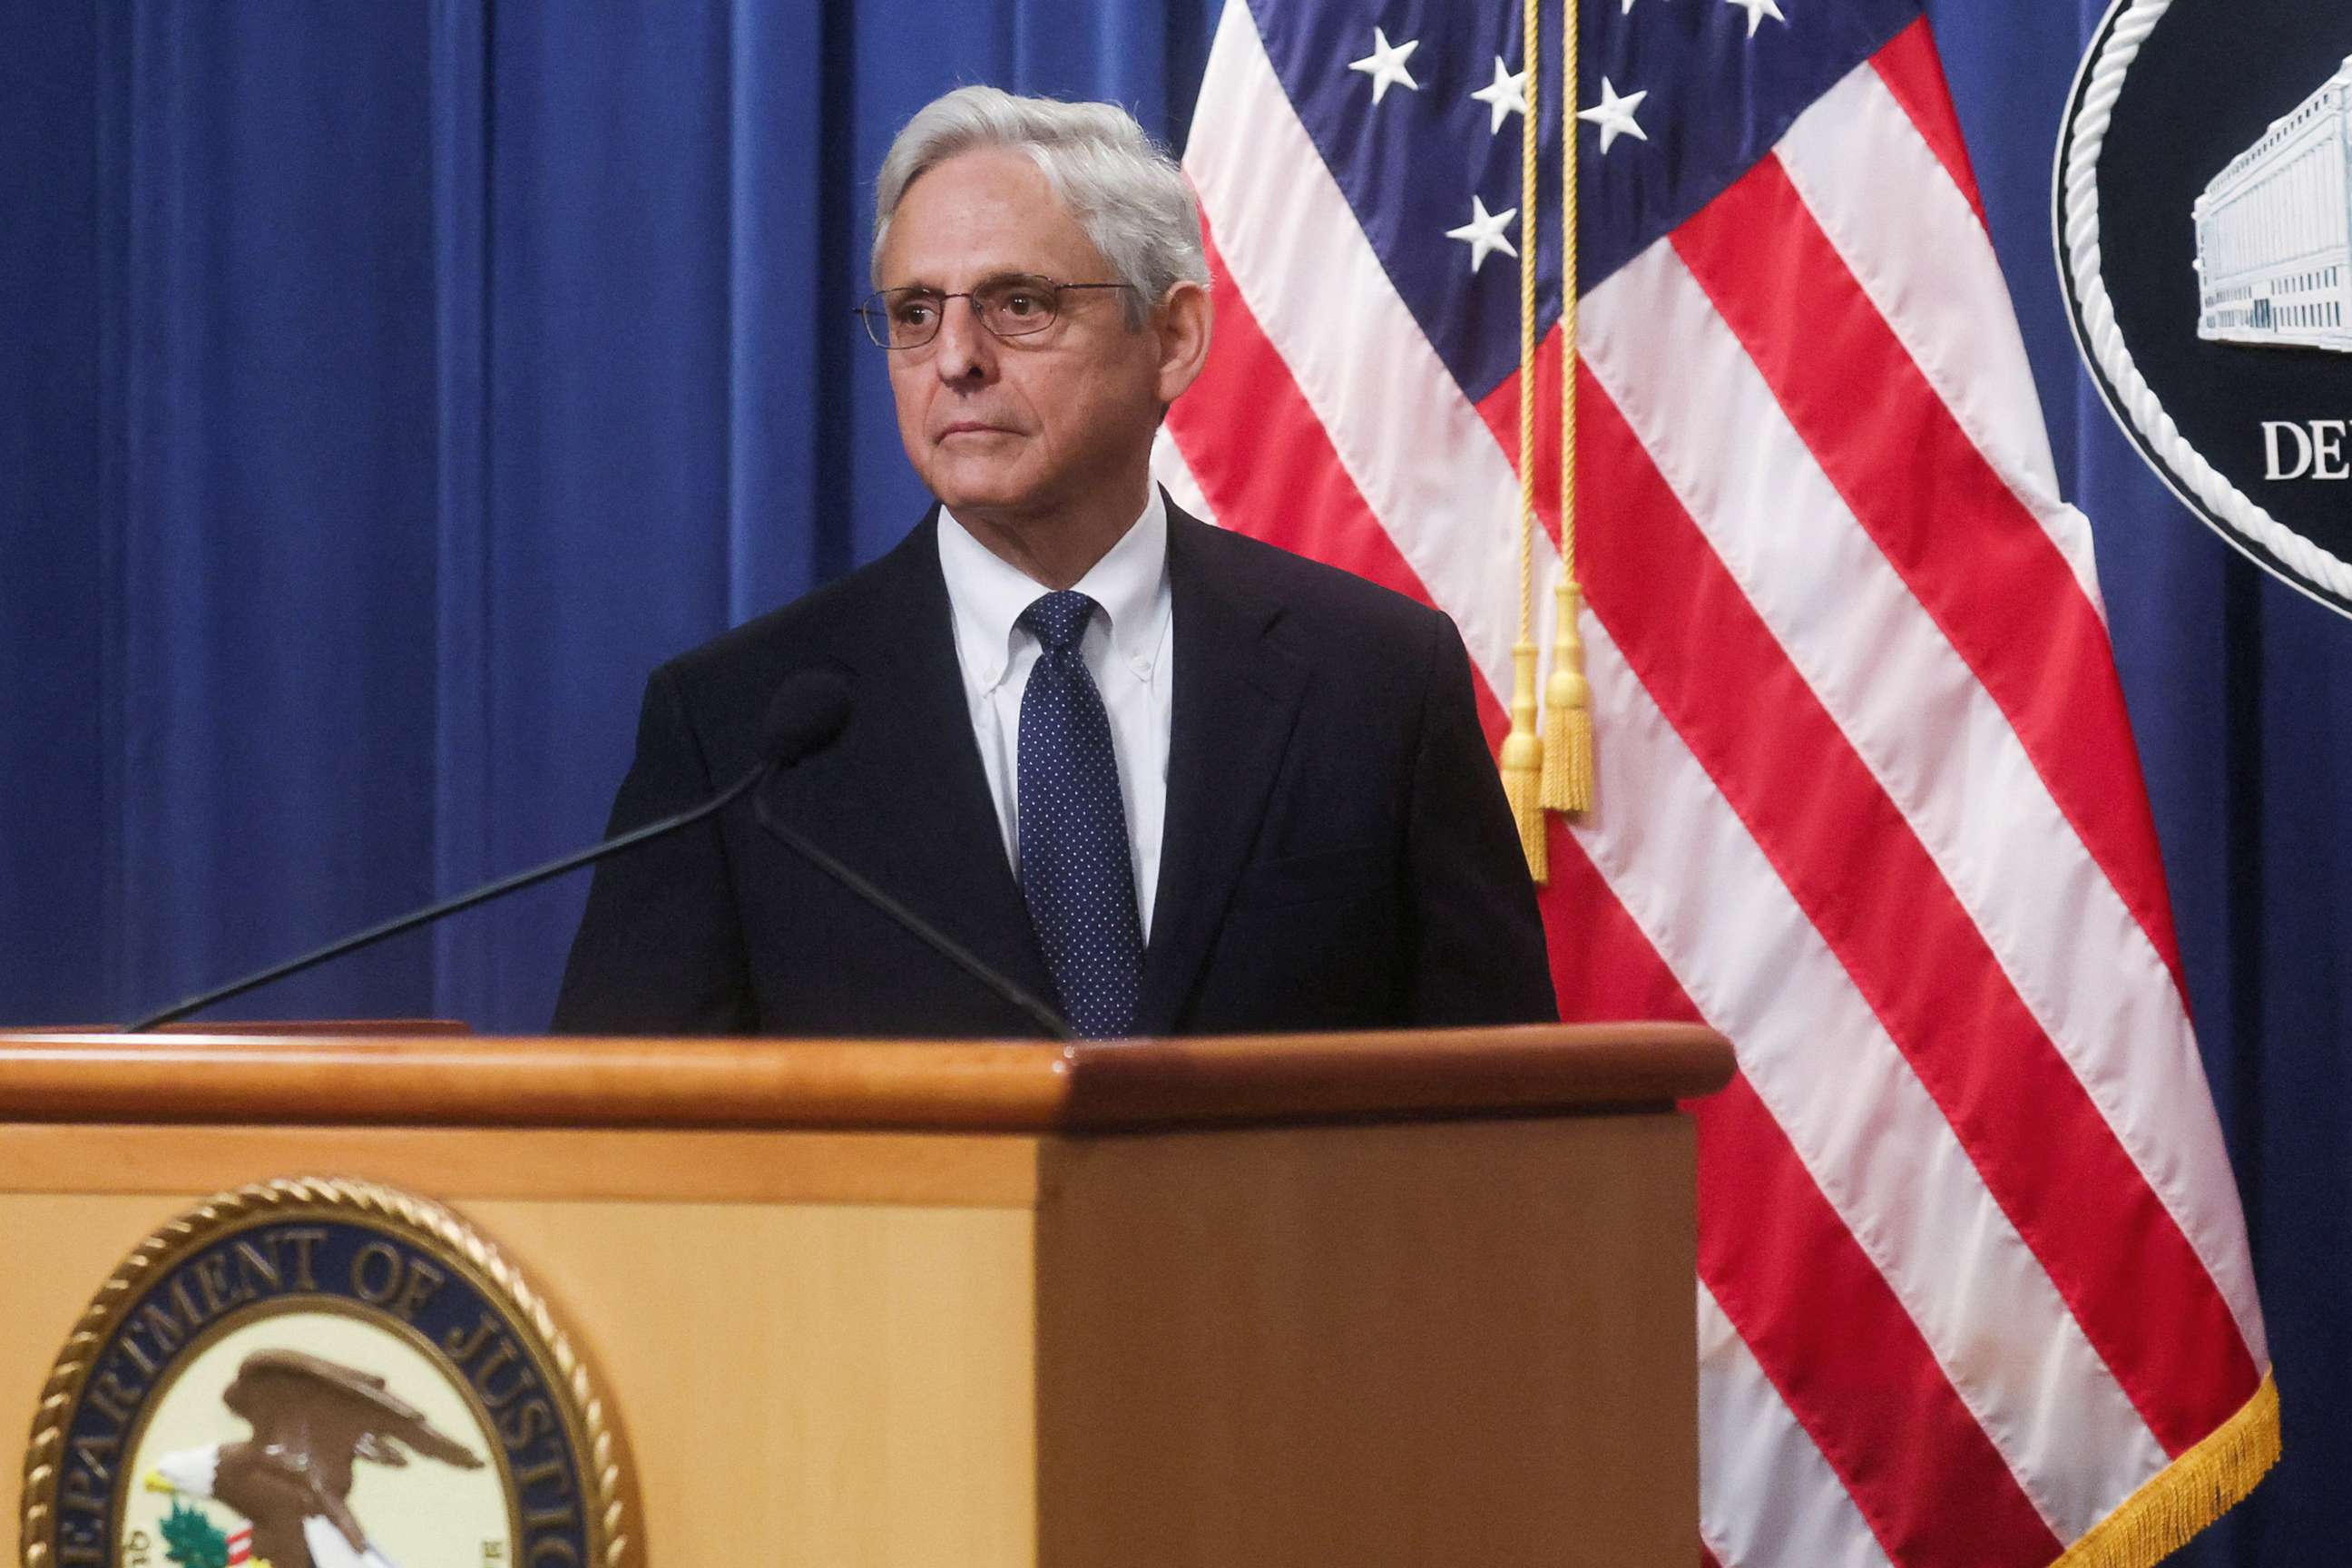 PHOTO: U.S. Attorney General Merrick Garland arrives to speak about the FBI's search warrant served at former President Donald Trump's Mar-a-Lago estate in Florida during a statement at the U.S. Justice Department in Washington, D.C., Aug. 11, 2022.